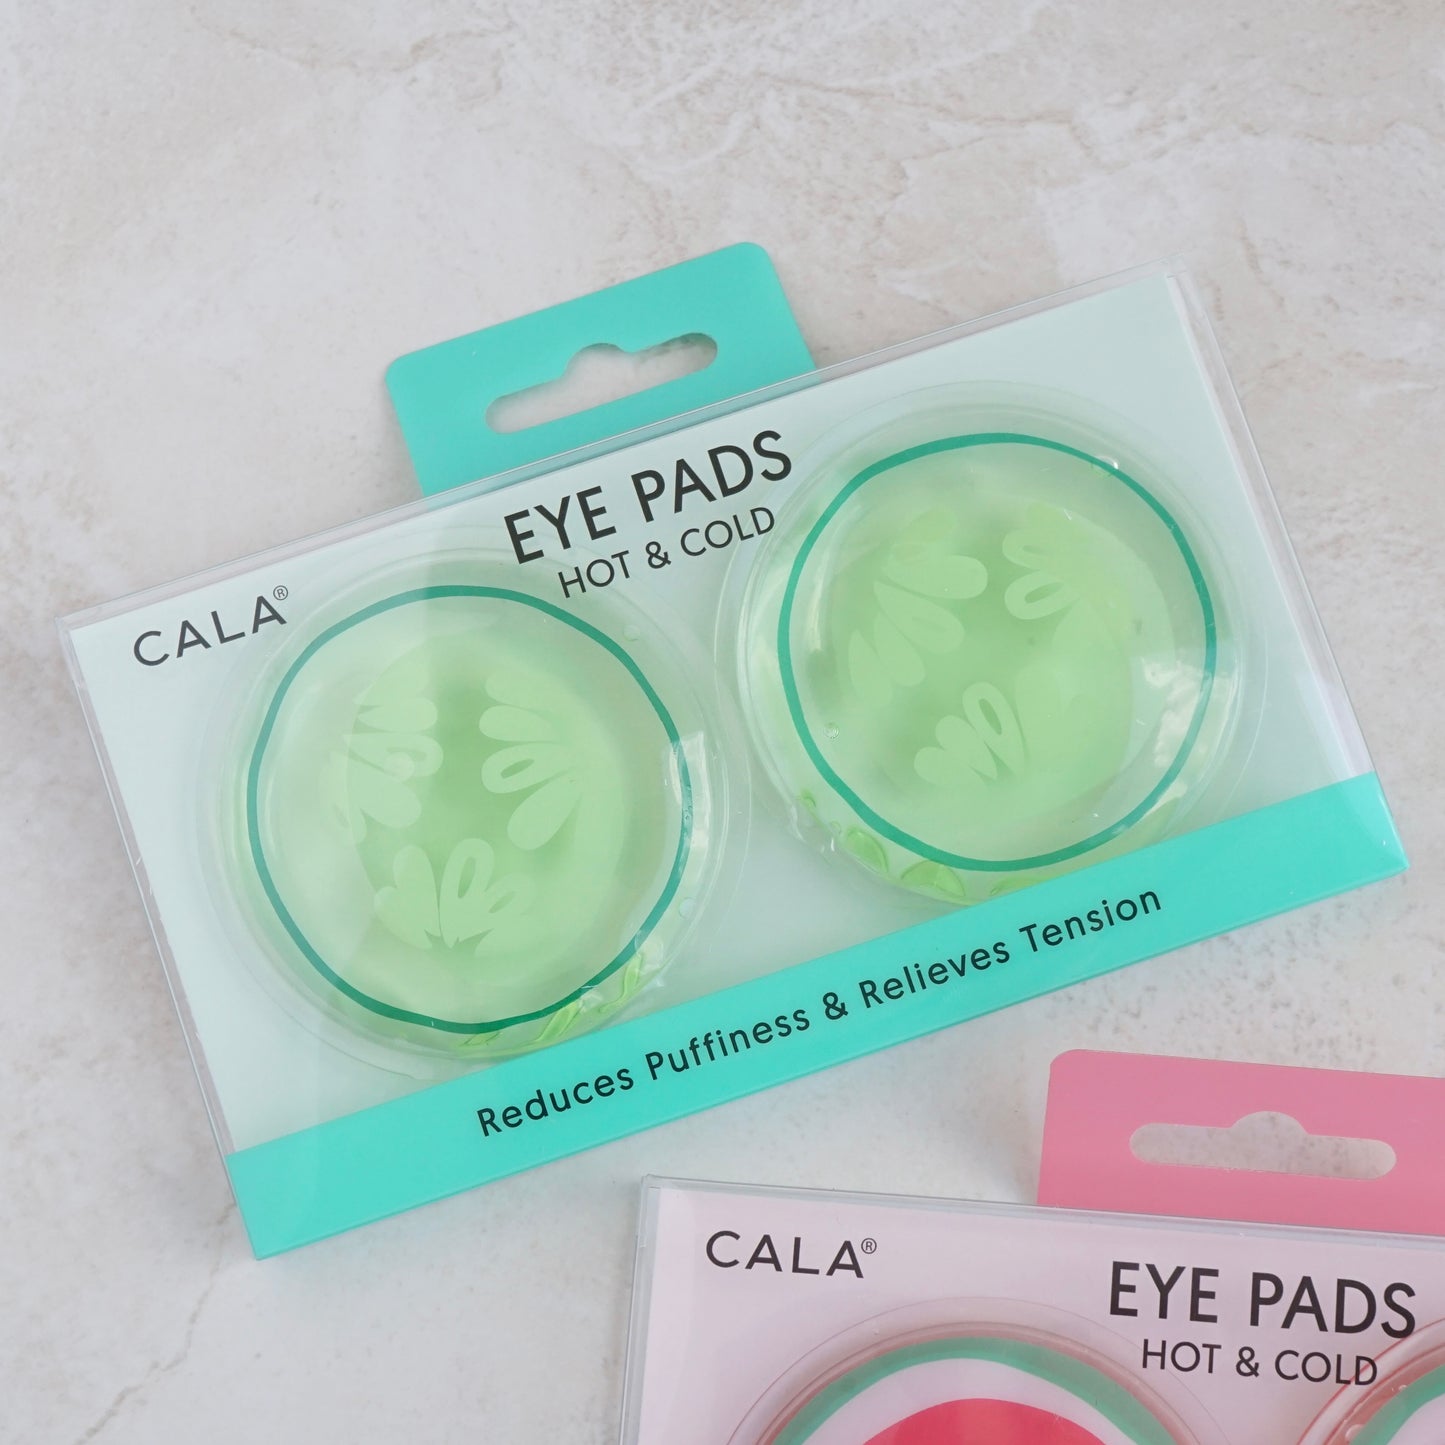 Reusable Hot/Cold Eye Pads - Watermelon, Rainbow, Flamingo or Cucumber Shapes